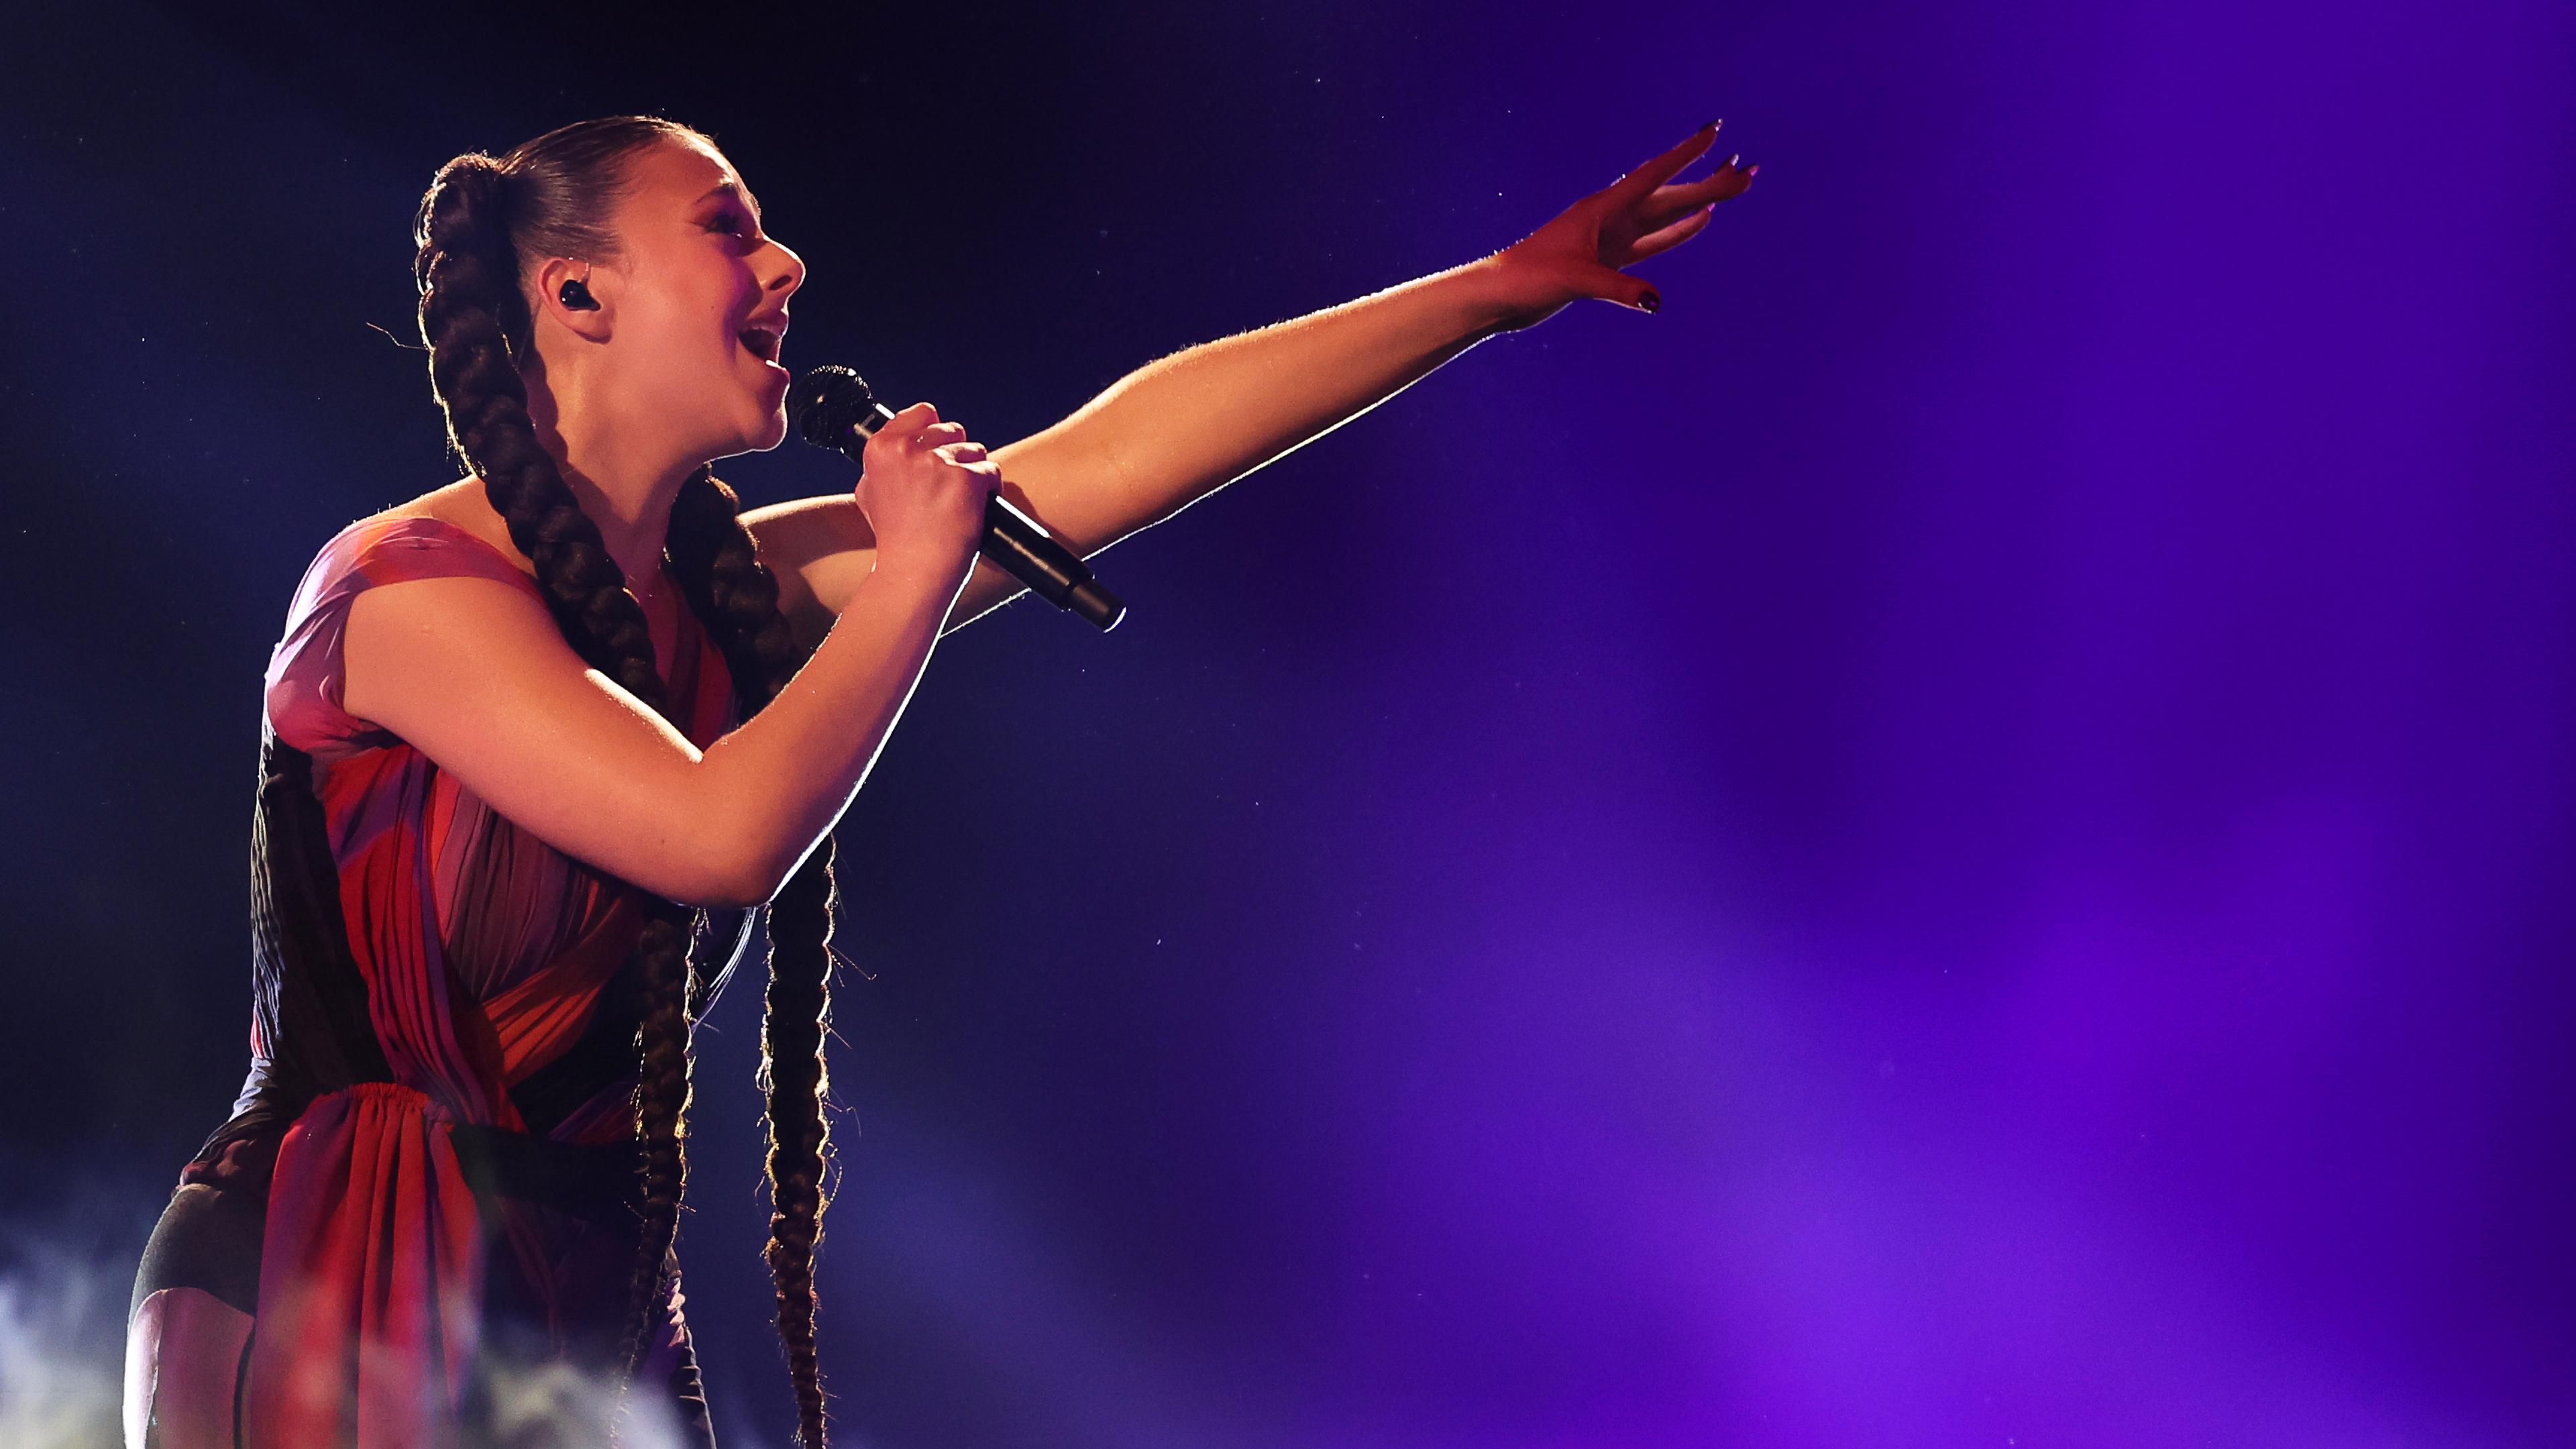 Tali performs her song “Fighter” during the Eurovision final on 11 May but winning points remained out of reach